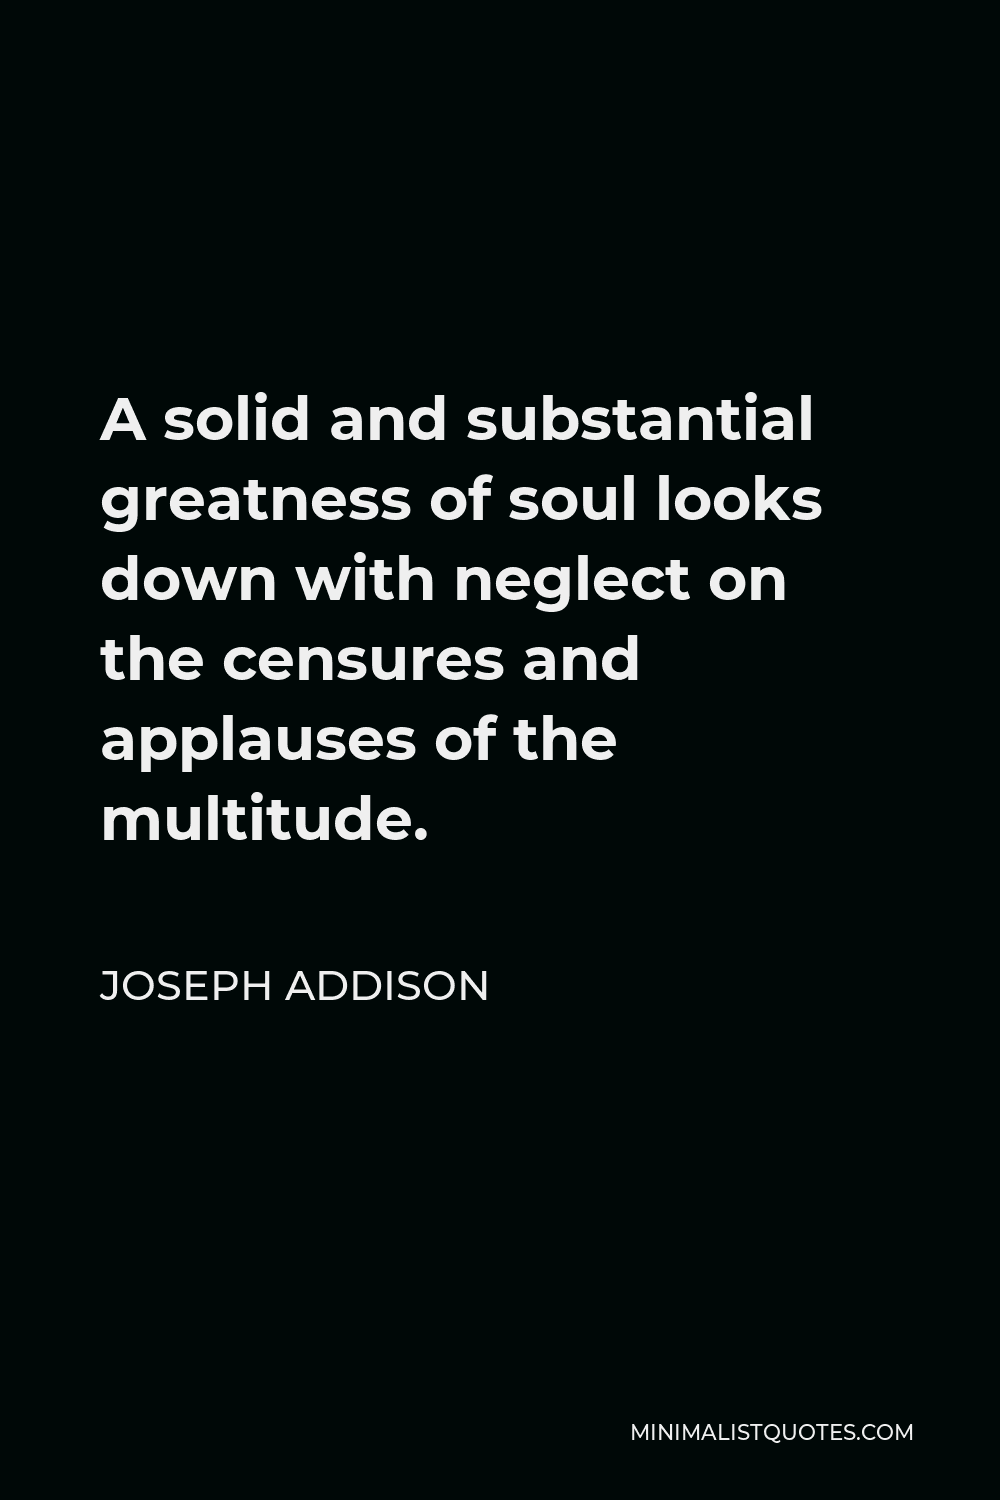 Joseph Addison Quote - A solid and substantial greatness of soul looks down with neglect on the censures and applauses of the multitude.